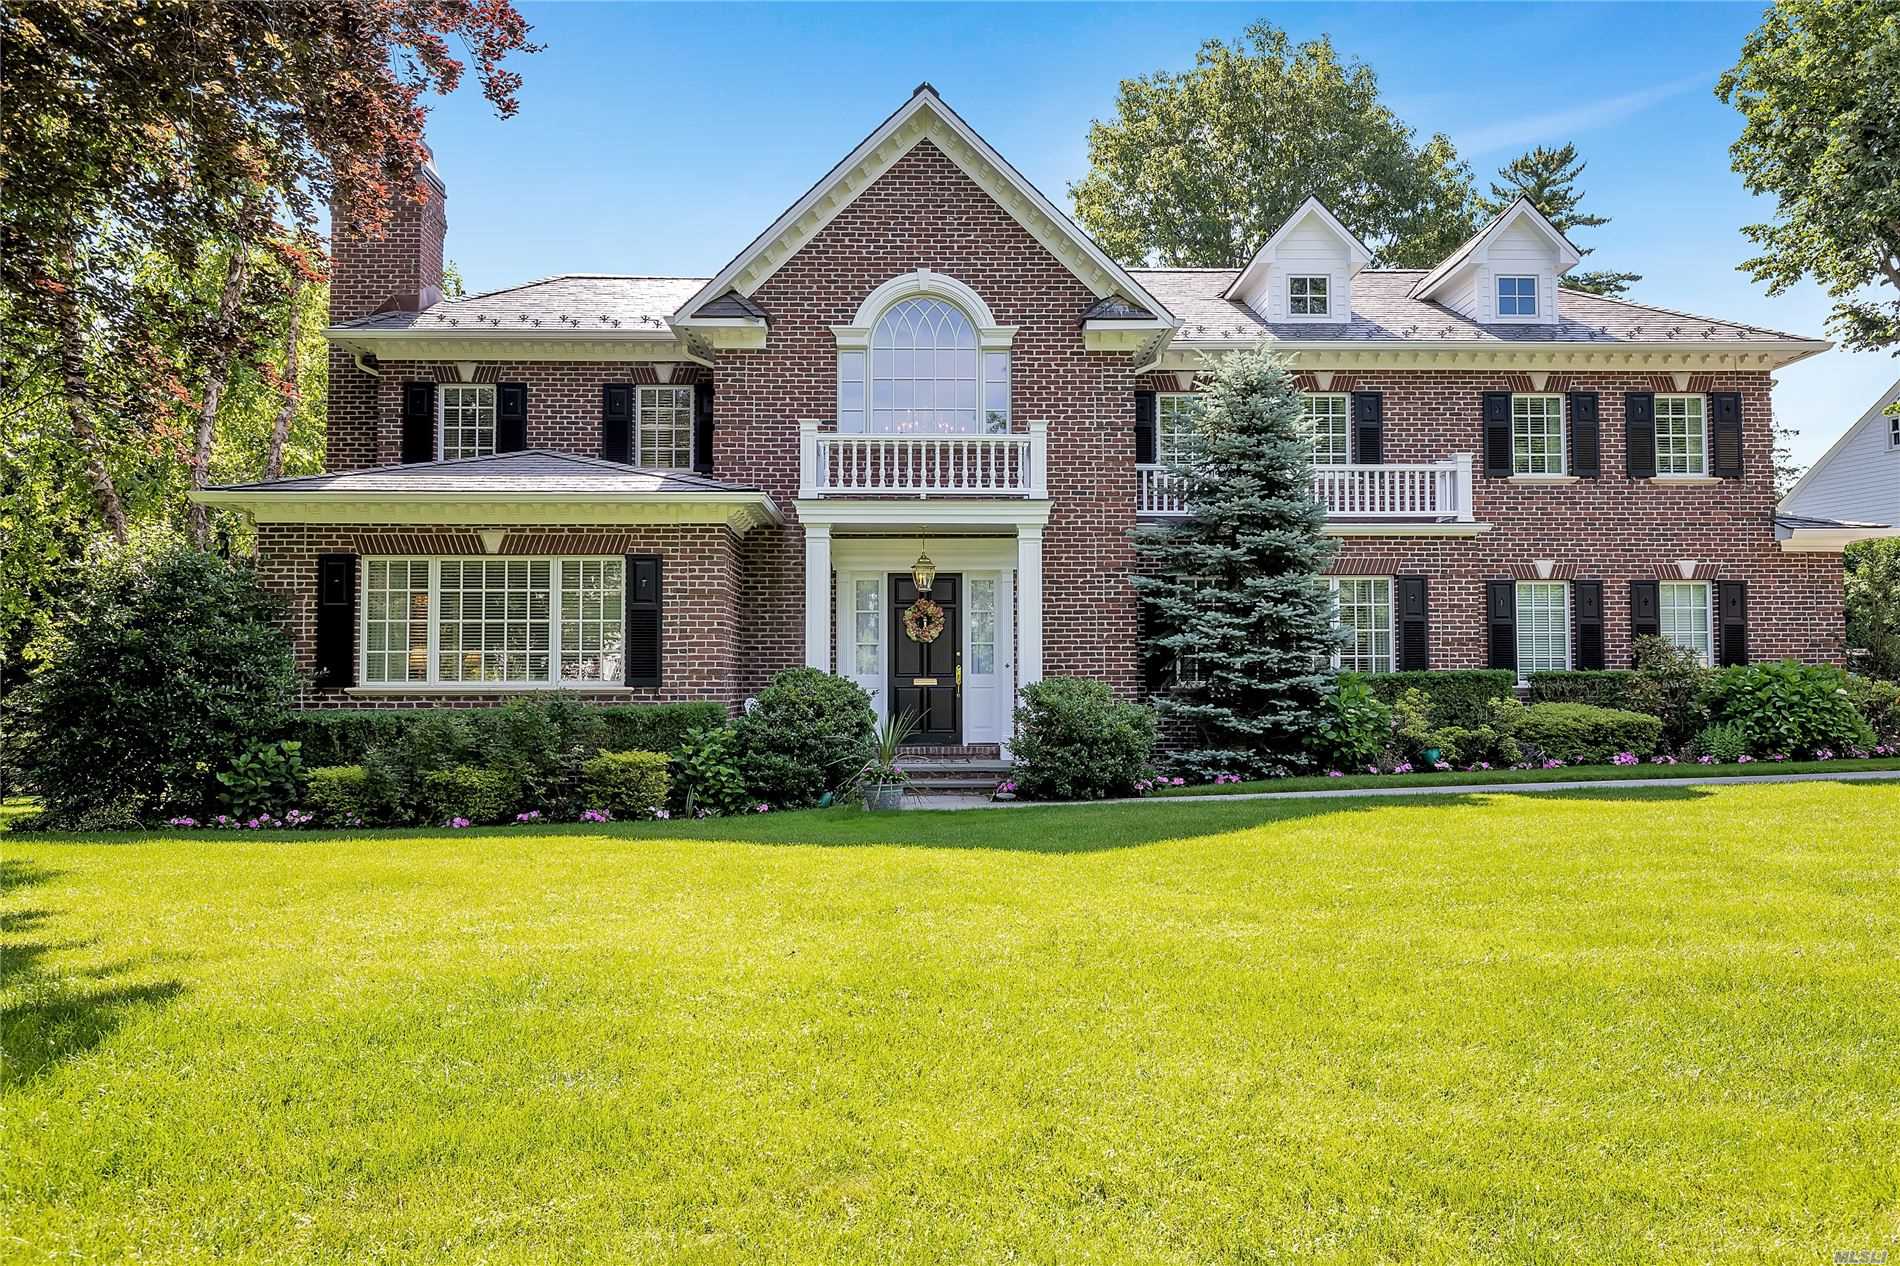 First Time ever on the market! Brick Center Hall colonial with 11 rooms, 5 bedrooms, 5 bathrooms, 2 car garage in the beautiful Village of Plandome. Center Hall Colonial, 2 Story Foyer, gourmet kitchen, wolf/subzero appliances, open to family room, back staircase